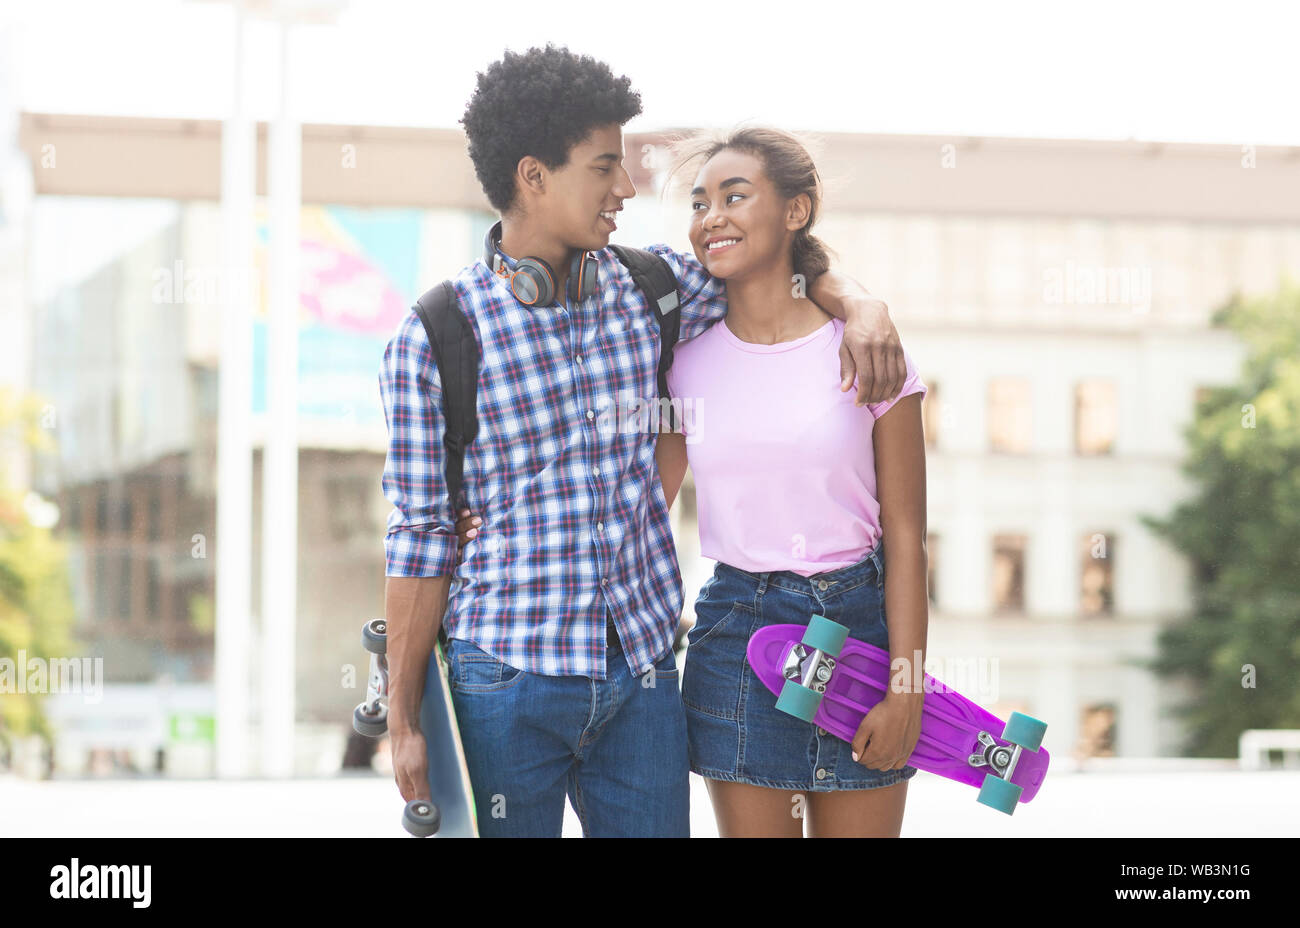 Teens dating in the city walking together outdoors Stock Photo